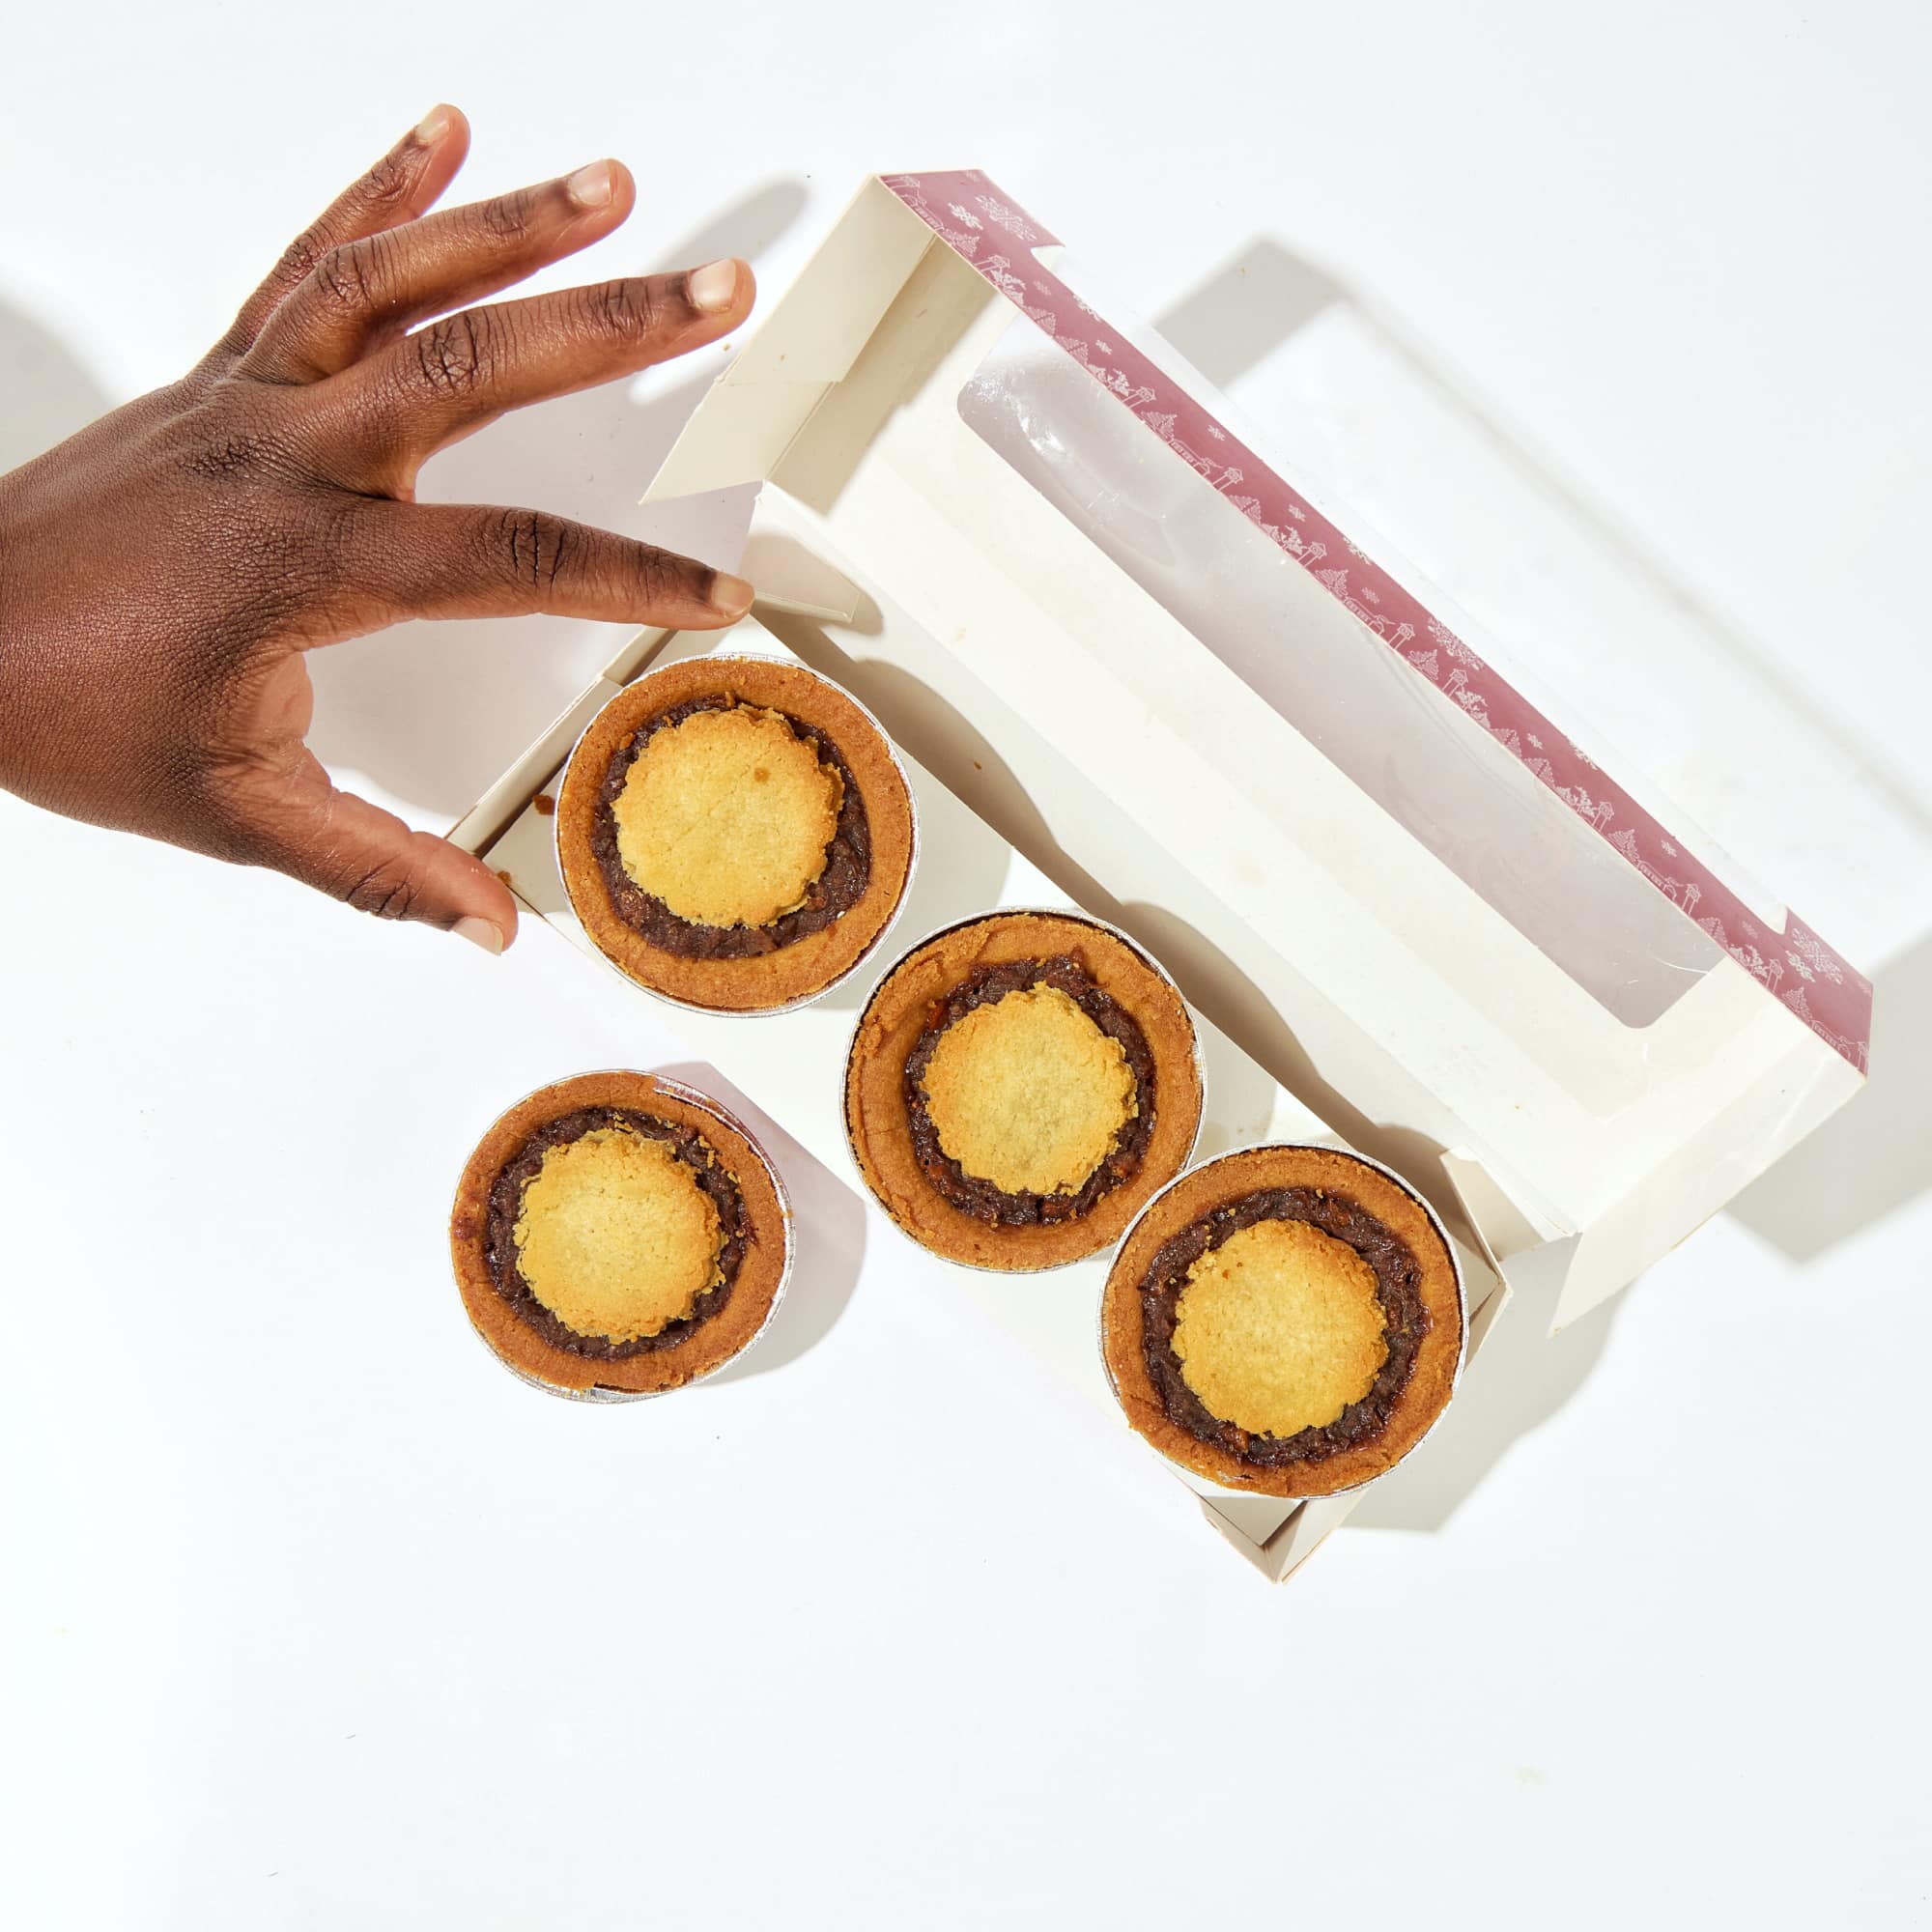 mince pies with hand reaching for it